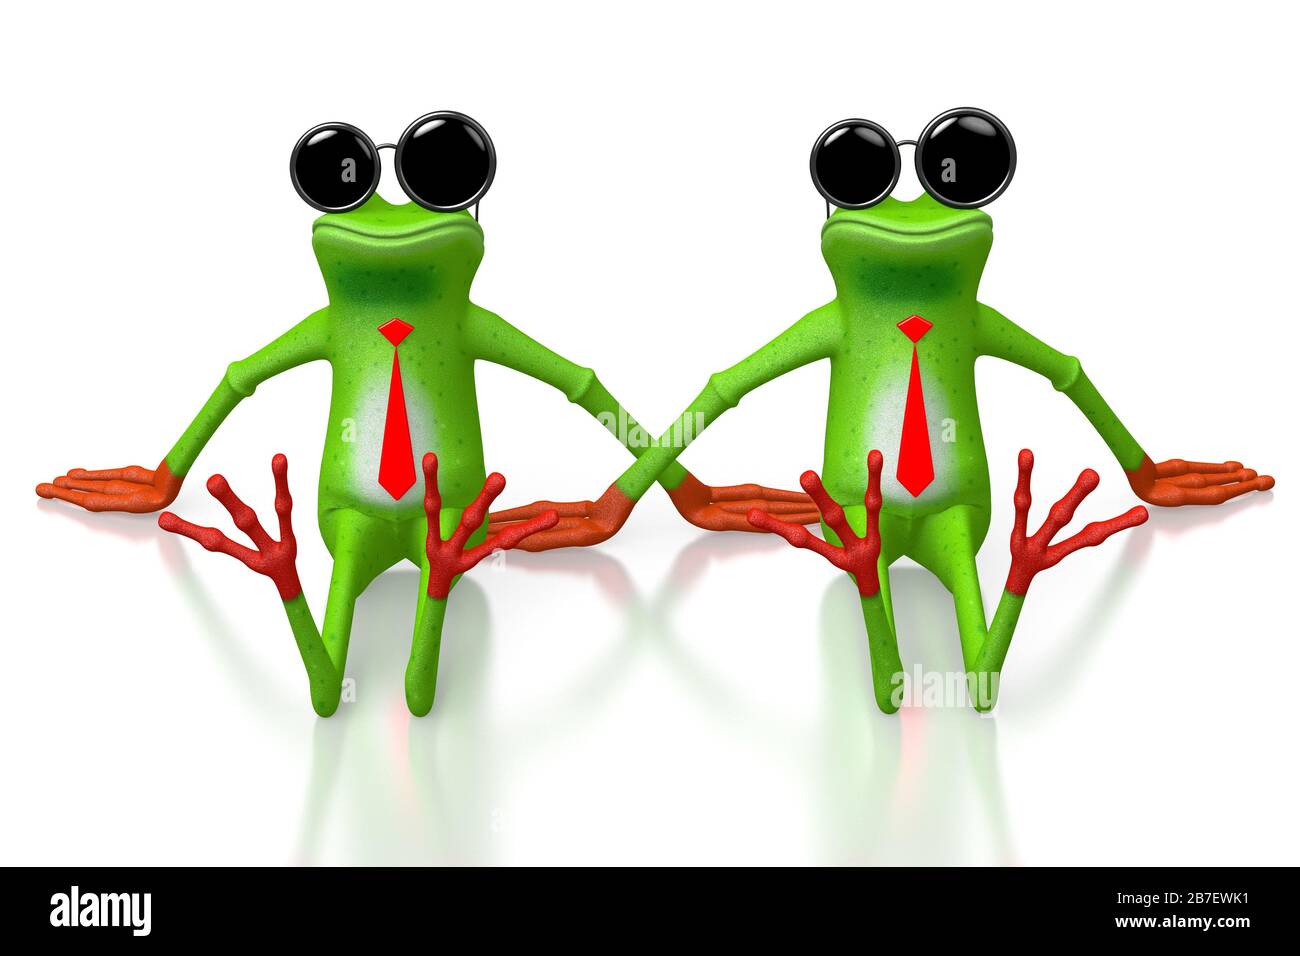 3D cartoon frogs with sunglasses on white background. Stock Photo